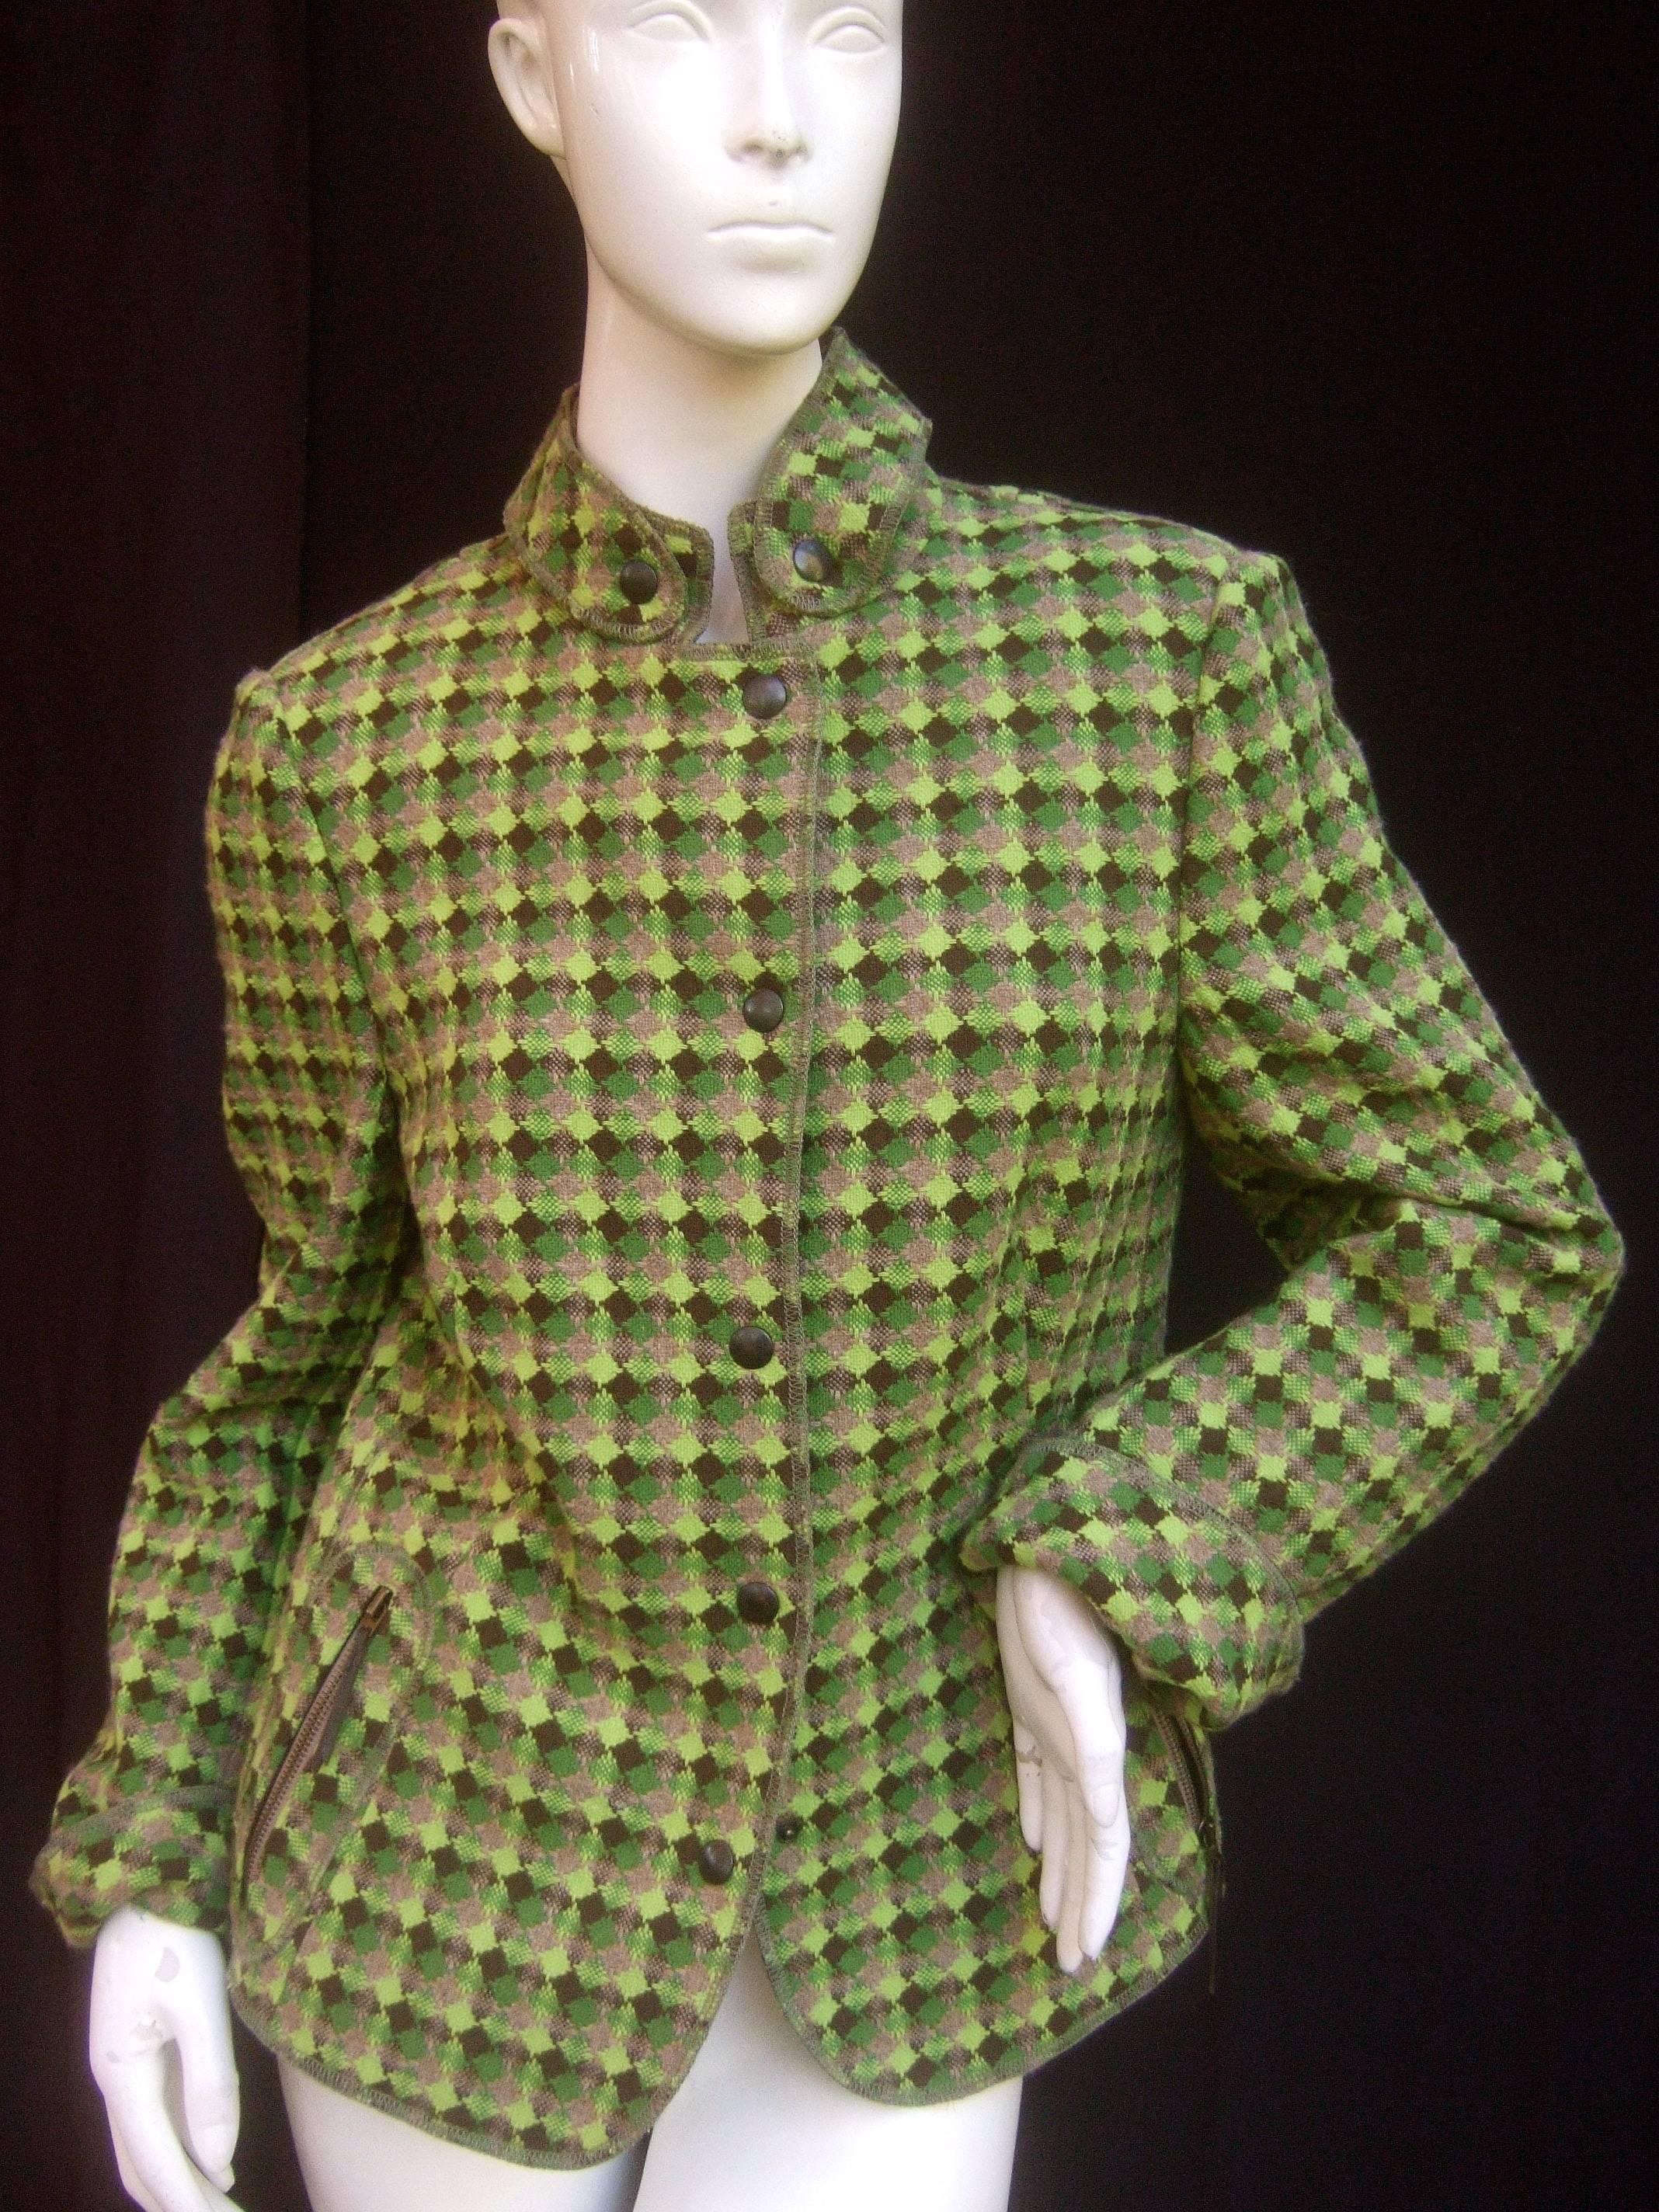 Akris Punto green plaid wool jacket 
The stylish jacket is designed with green
and brown wool geometric knit throughout

Secures with a set of metal snap buttons
The lower front sides have diagonal zippered
pockets 

Labeled Akris Punto (US Size 14)